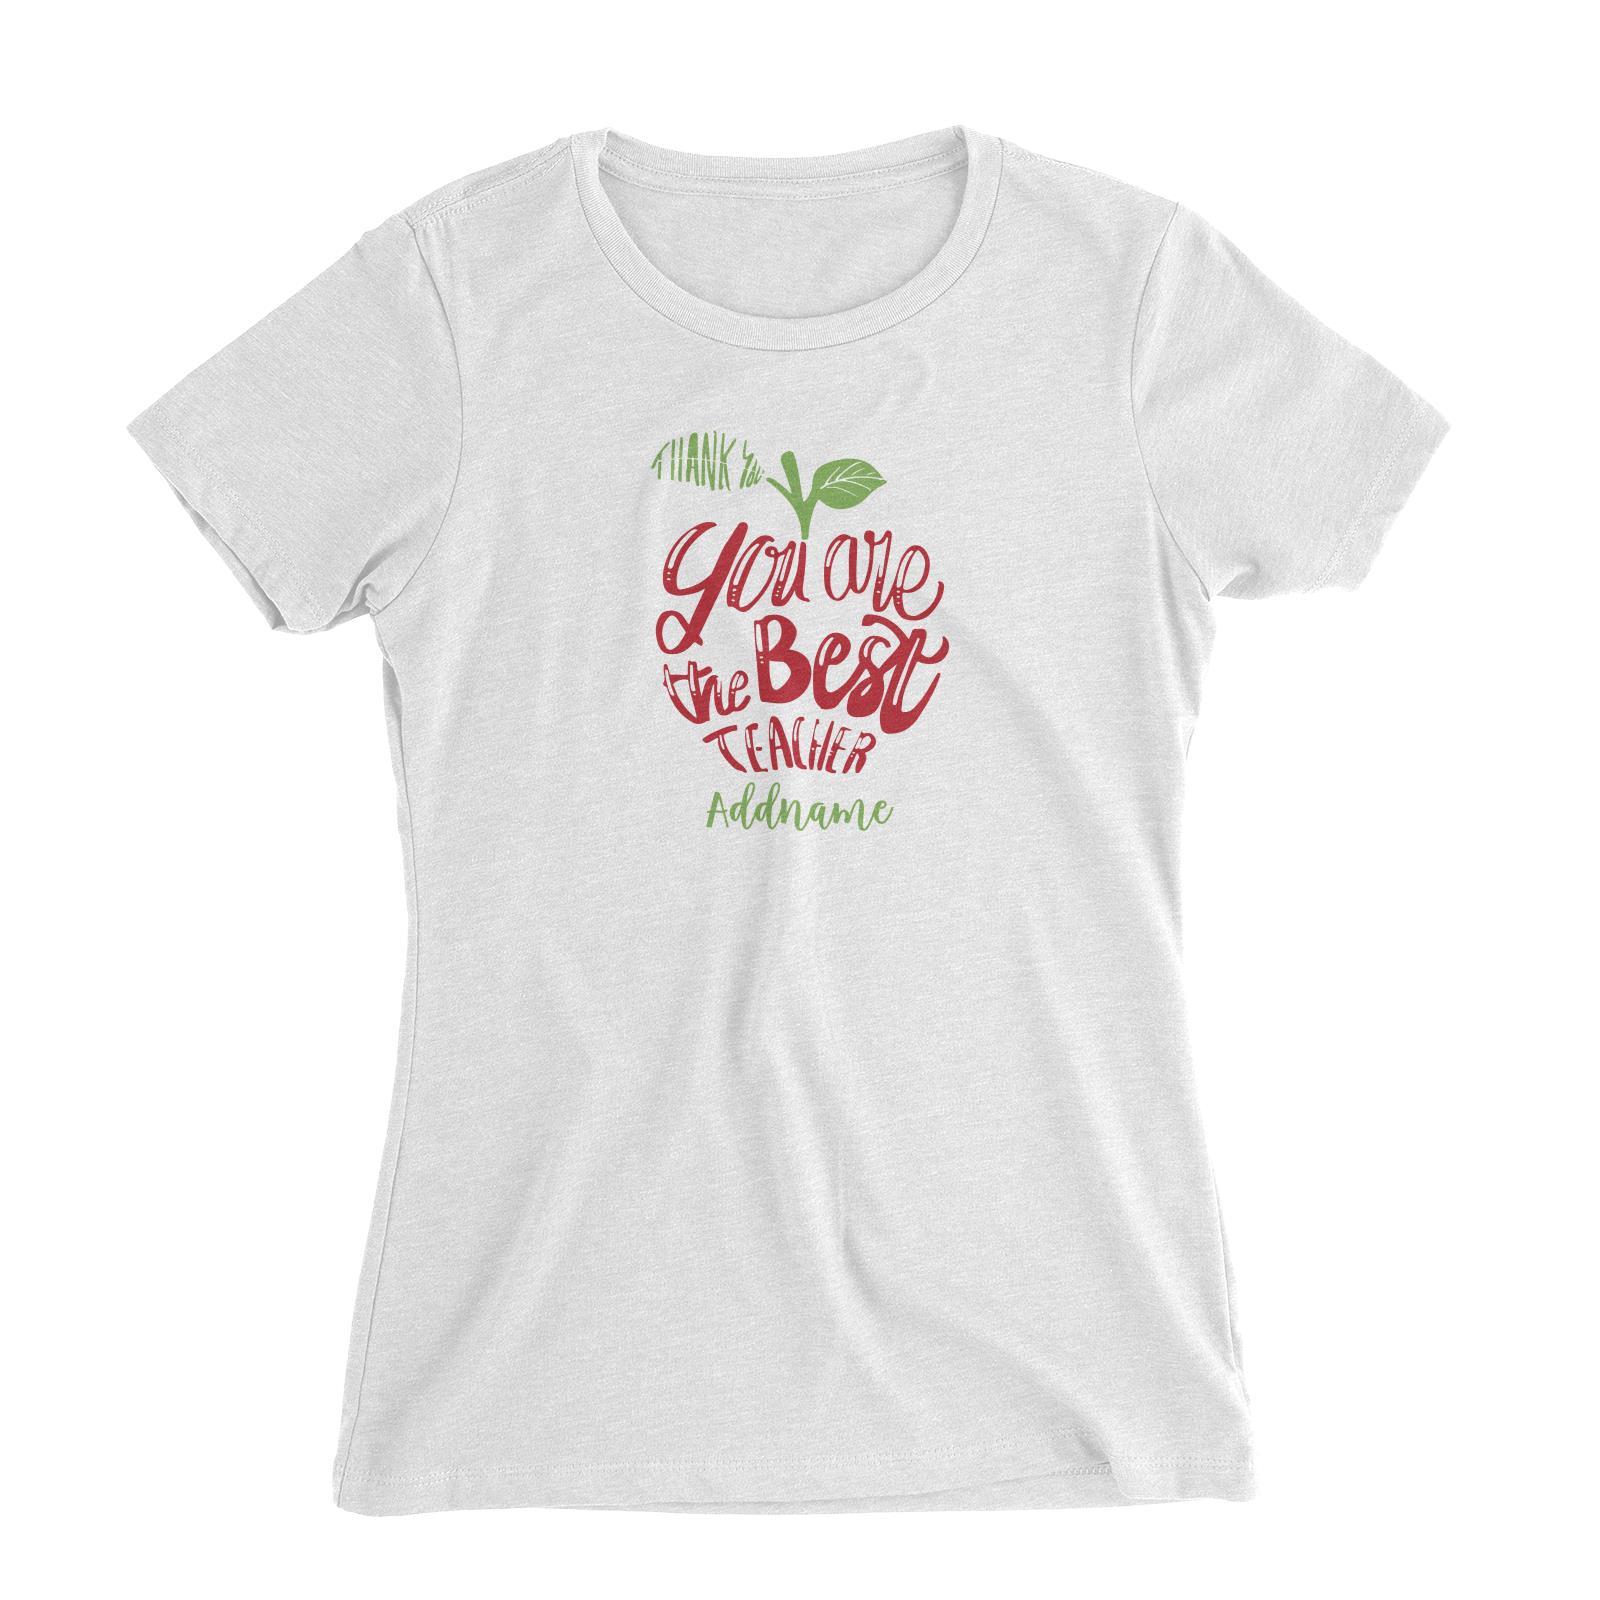 Teacher Apple Thank You You Are The Best Teacher Addname Women's Slim Fit T-Shirt